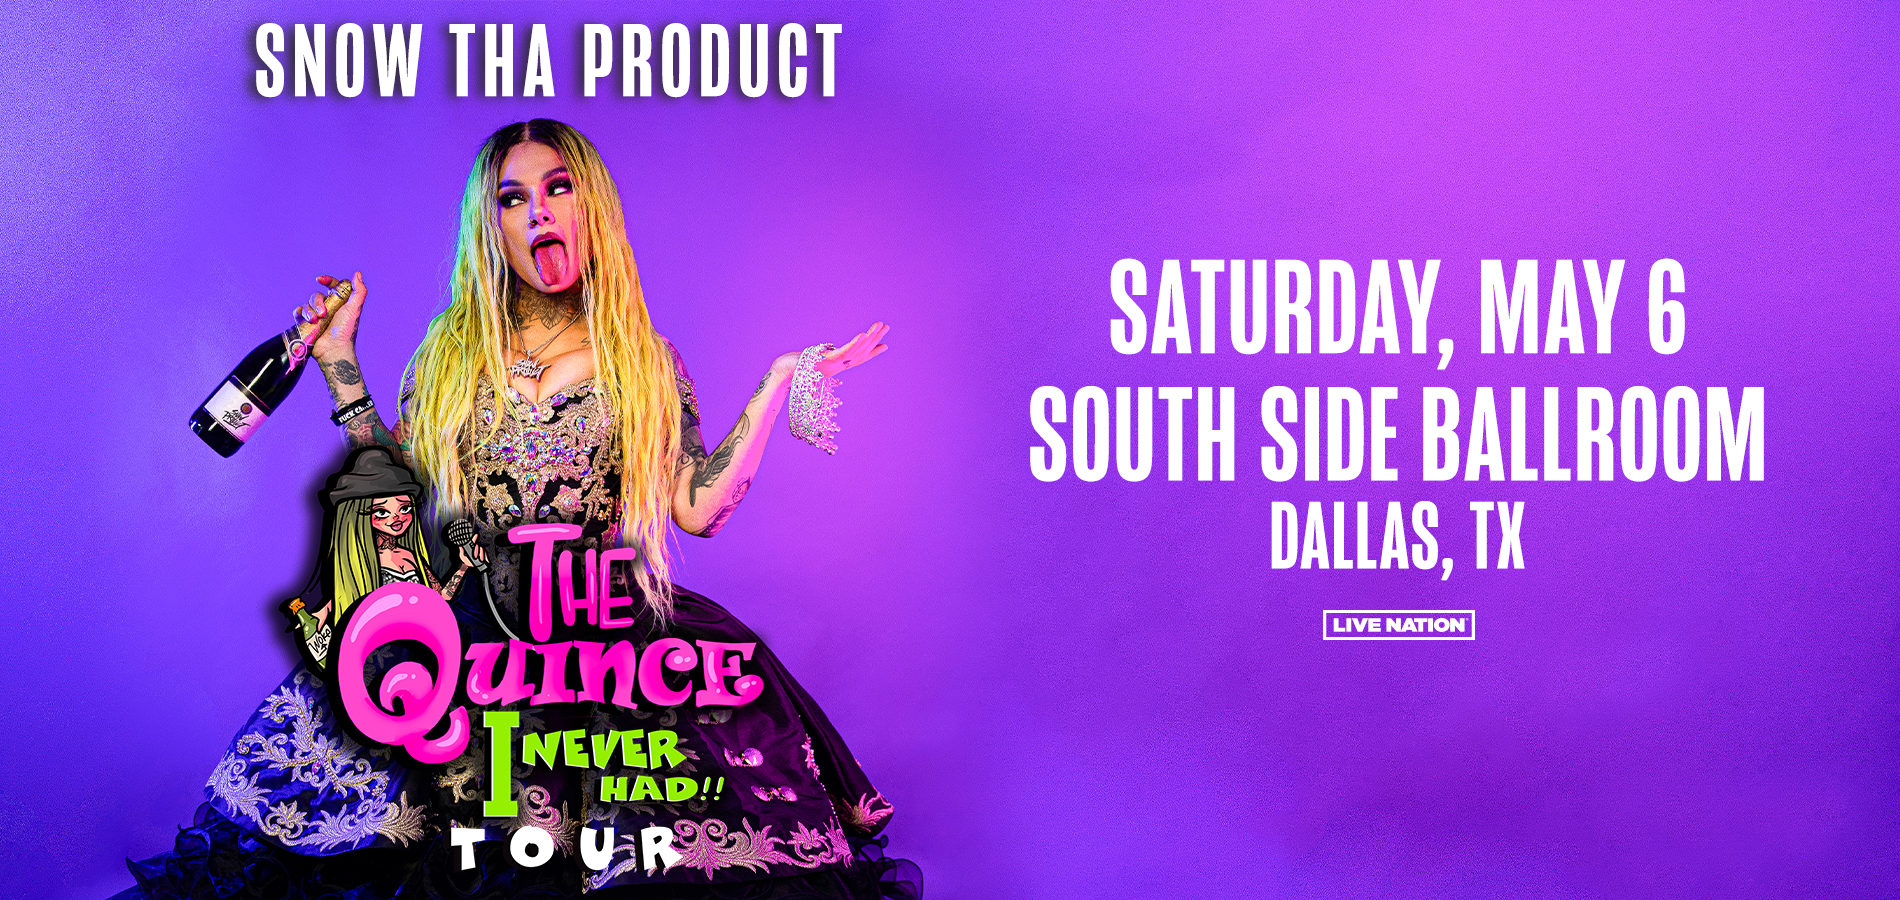 Snow Tha Product: The Quince I Never Had Tour